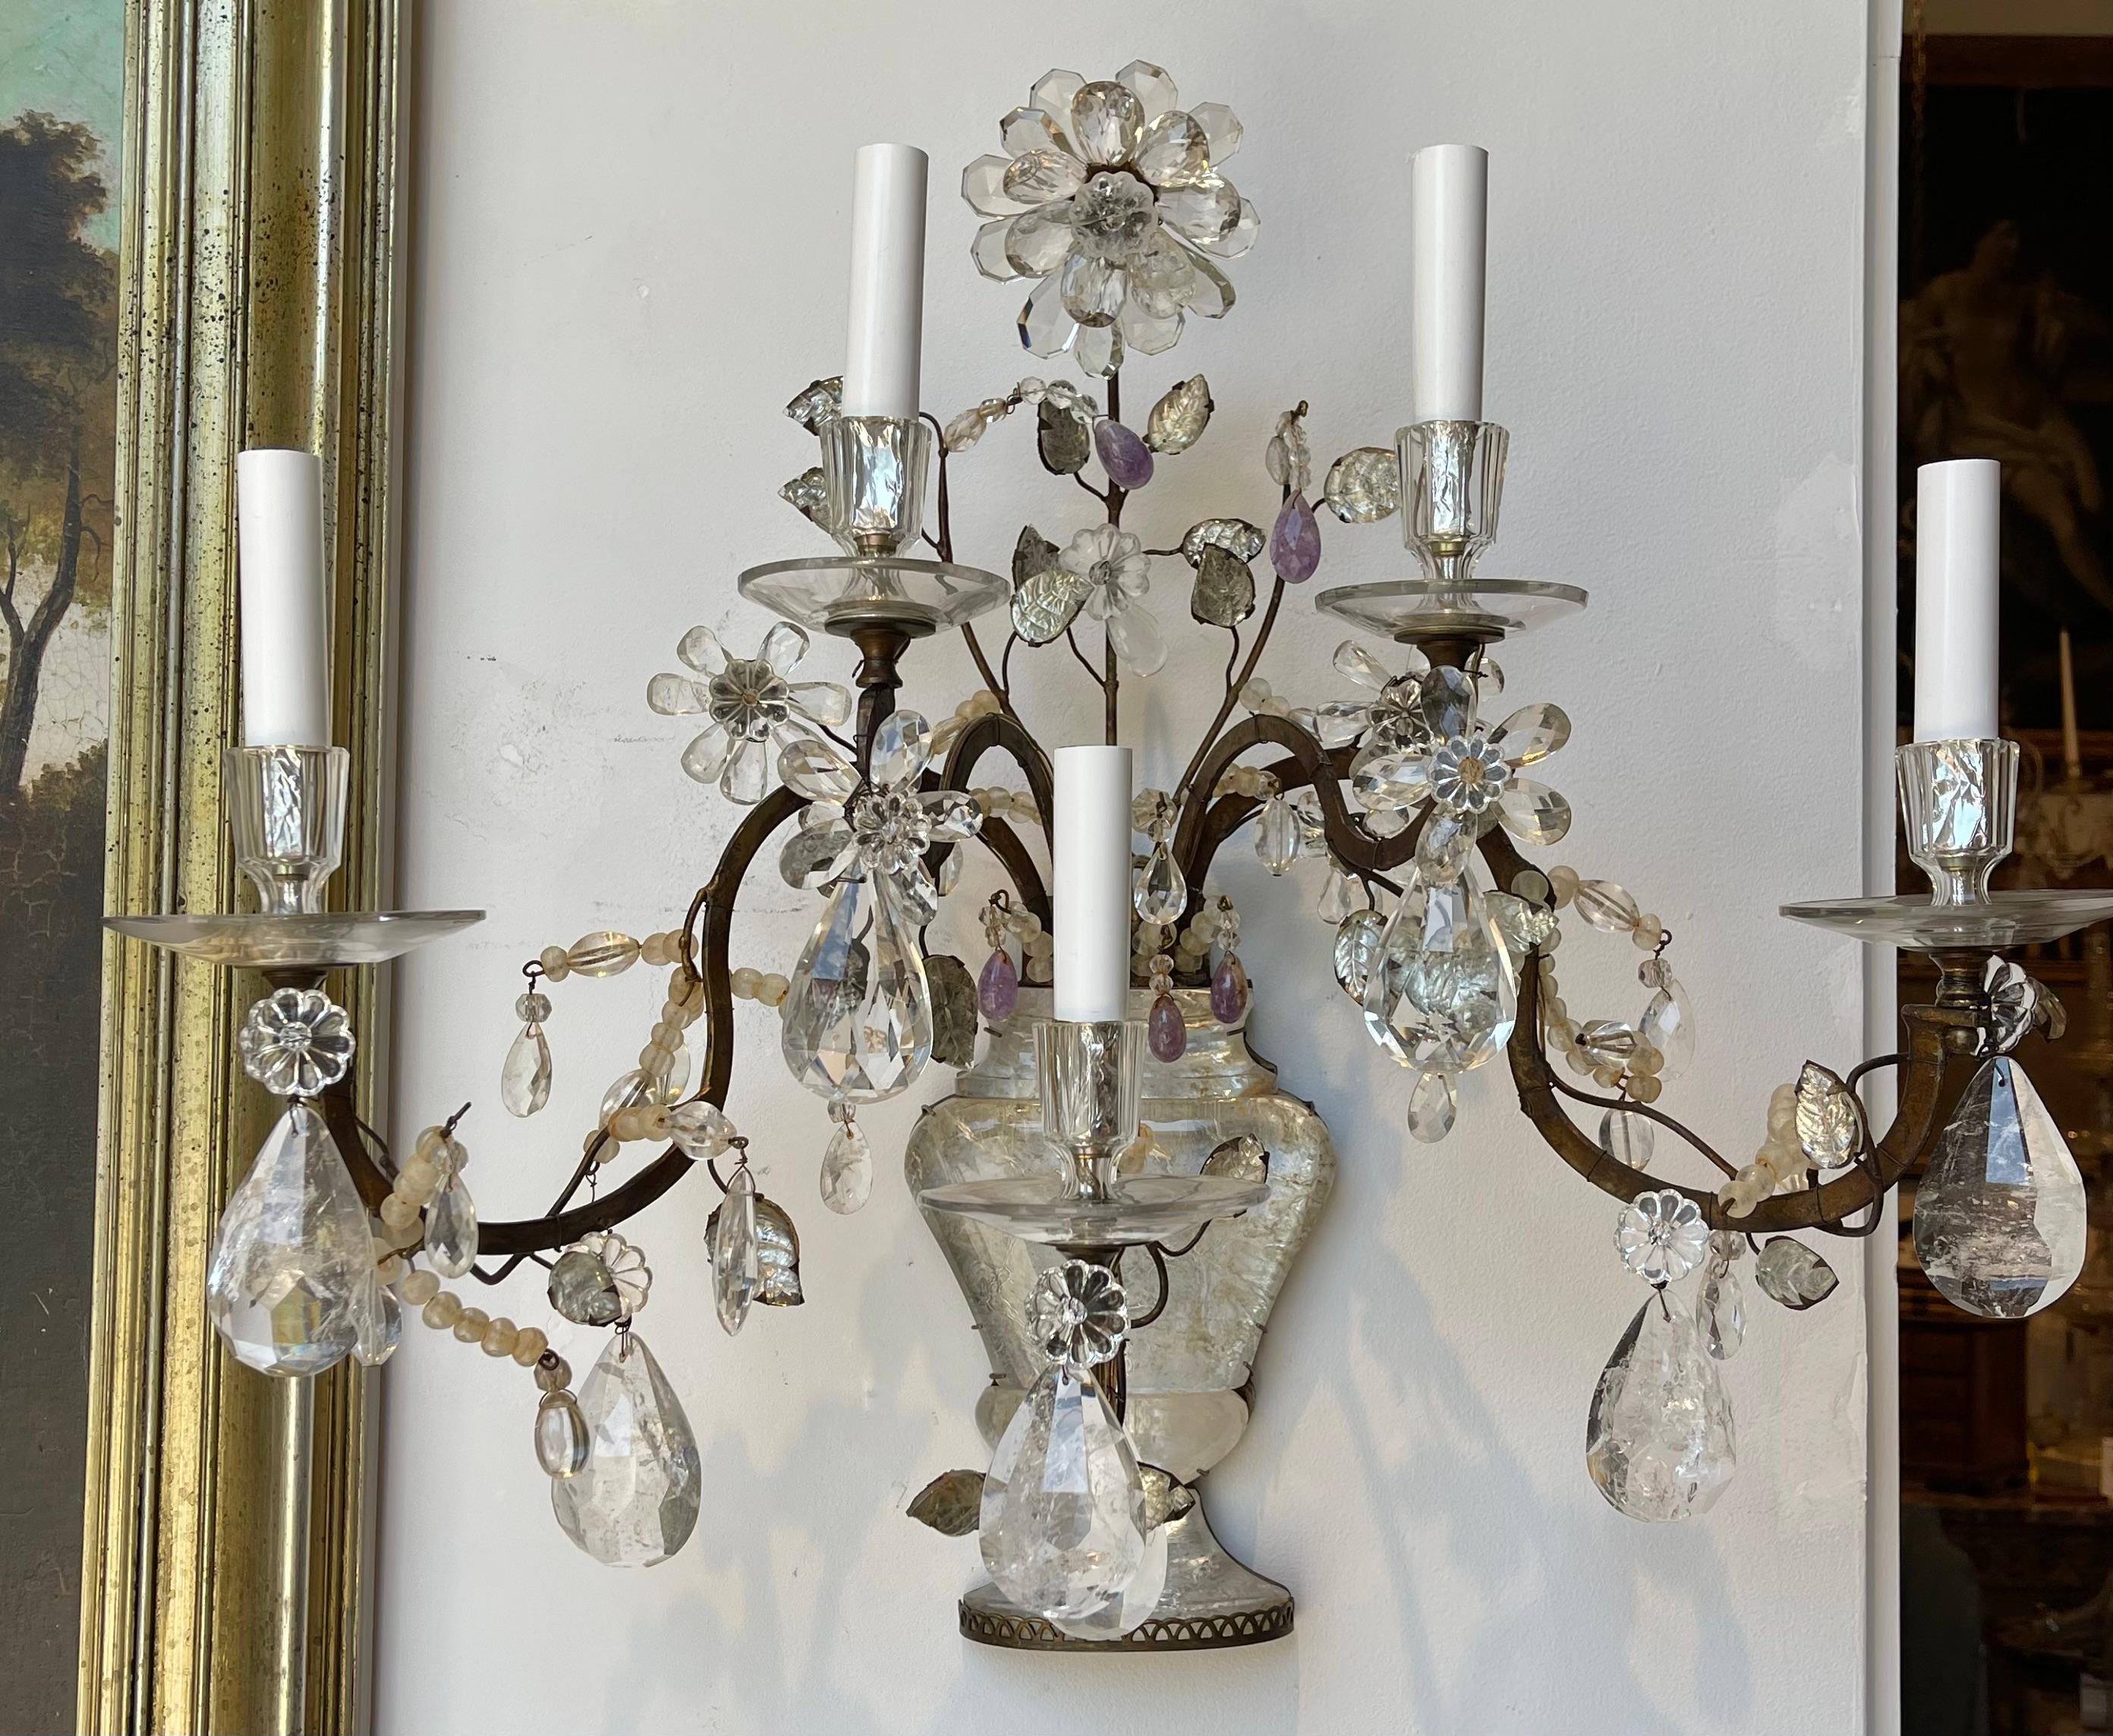 Pair of Significant Maison Bagues Rock Crystal and Iron Wall Sconces.  Hand cut rock crystal pendents and flowers.  Rock Crystal Urns issuing flower branches.  Wrought Iron Arms with natural patina and early silver remnants.  

Great 1940's Bagues,